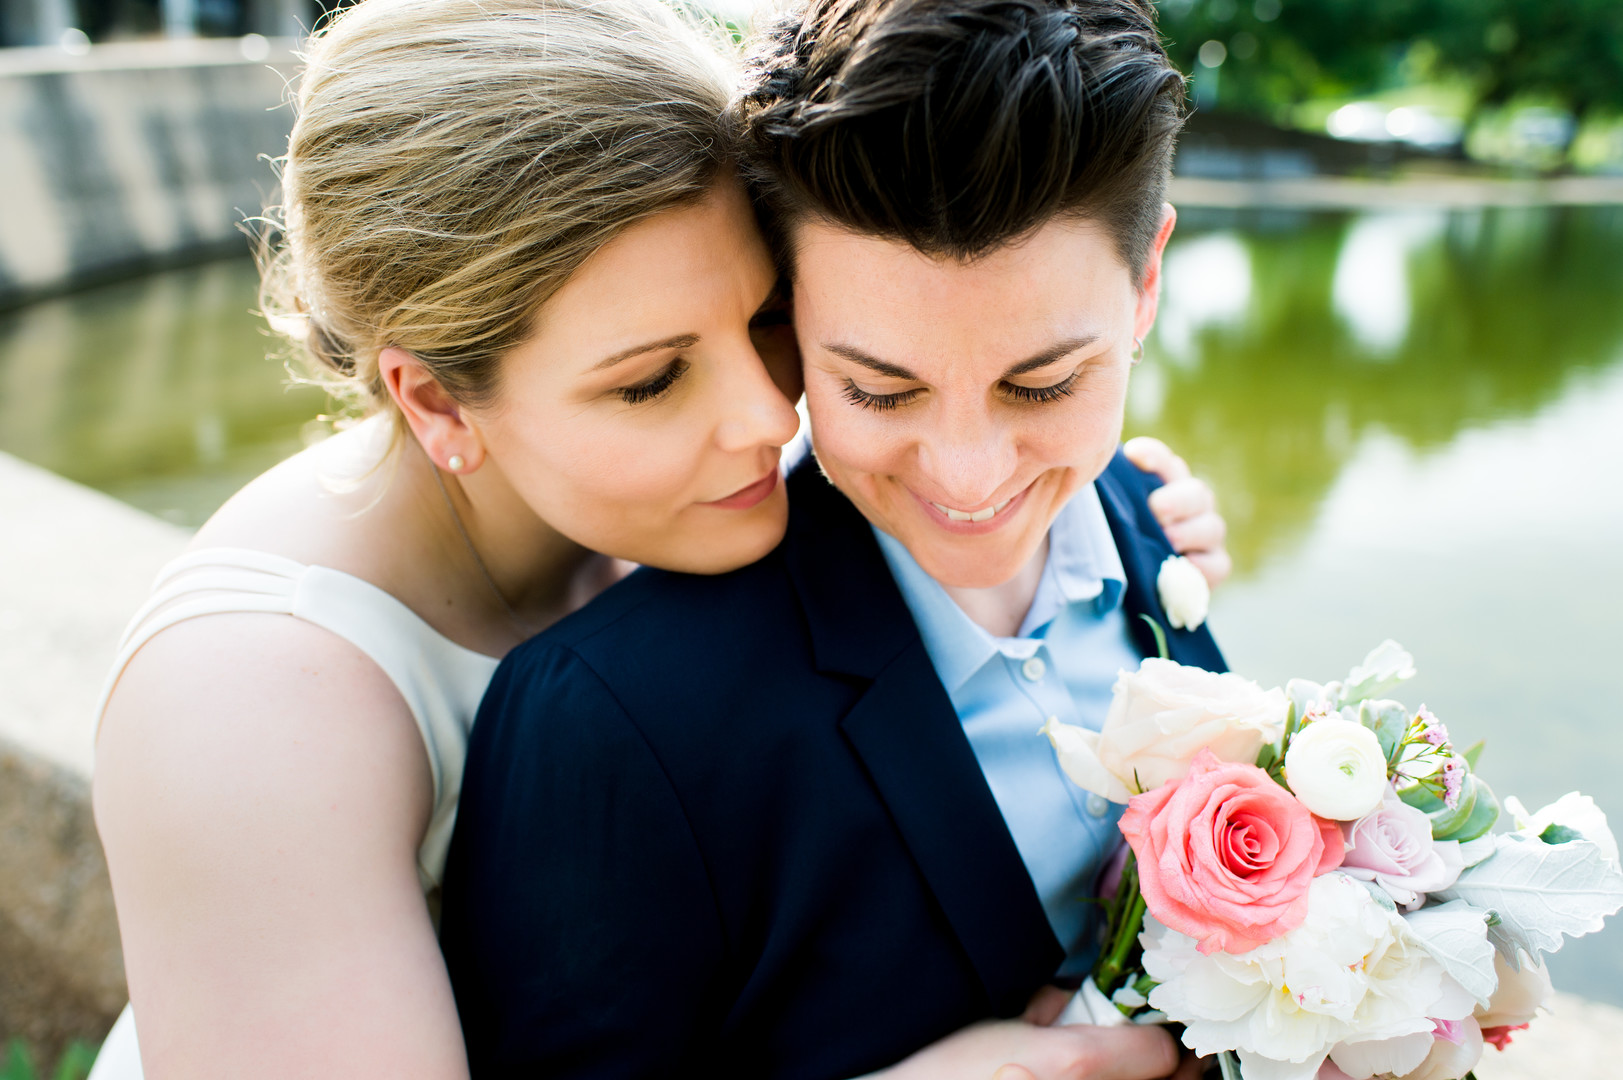 Intimate spring wedding at Butler Park in Austin, Texas LGBTQ+ weddings lesbian wedding two brides white dress navy blue suit